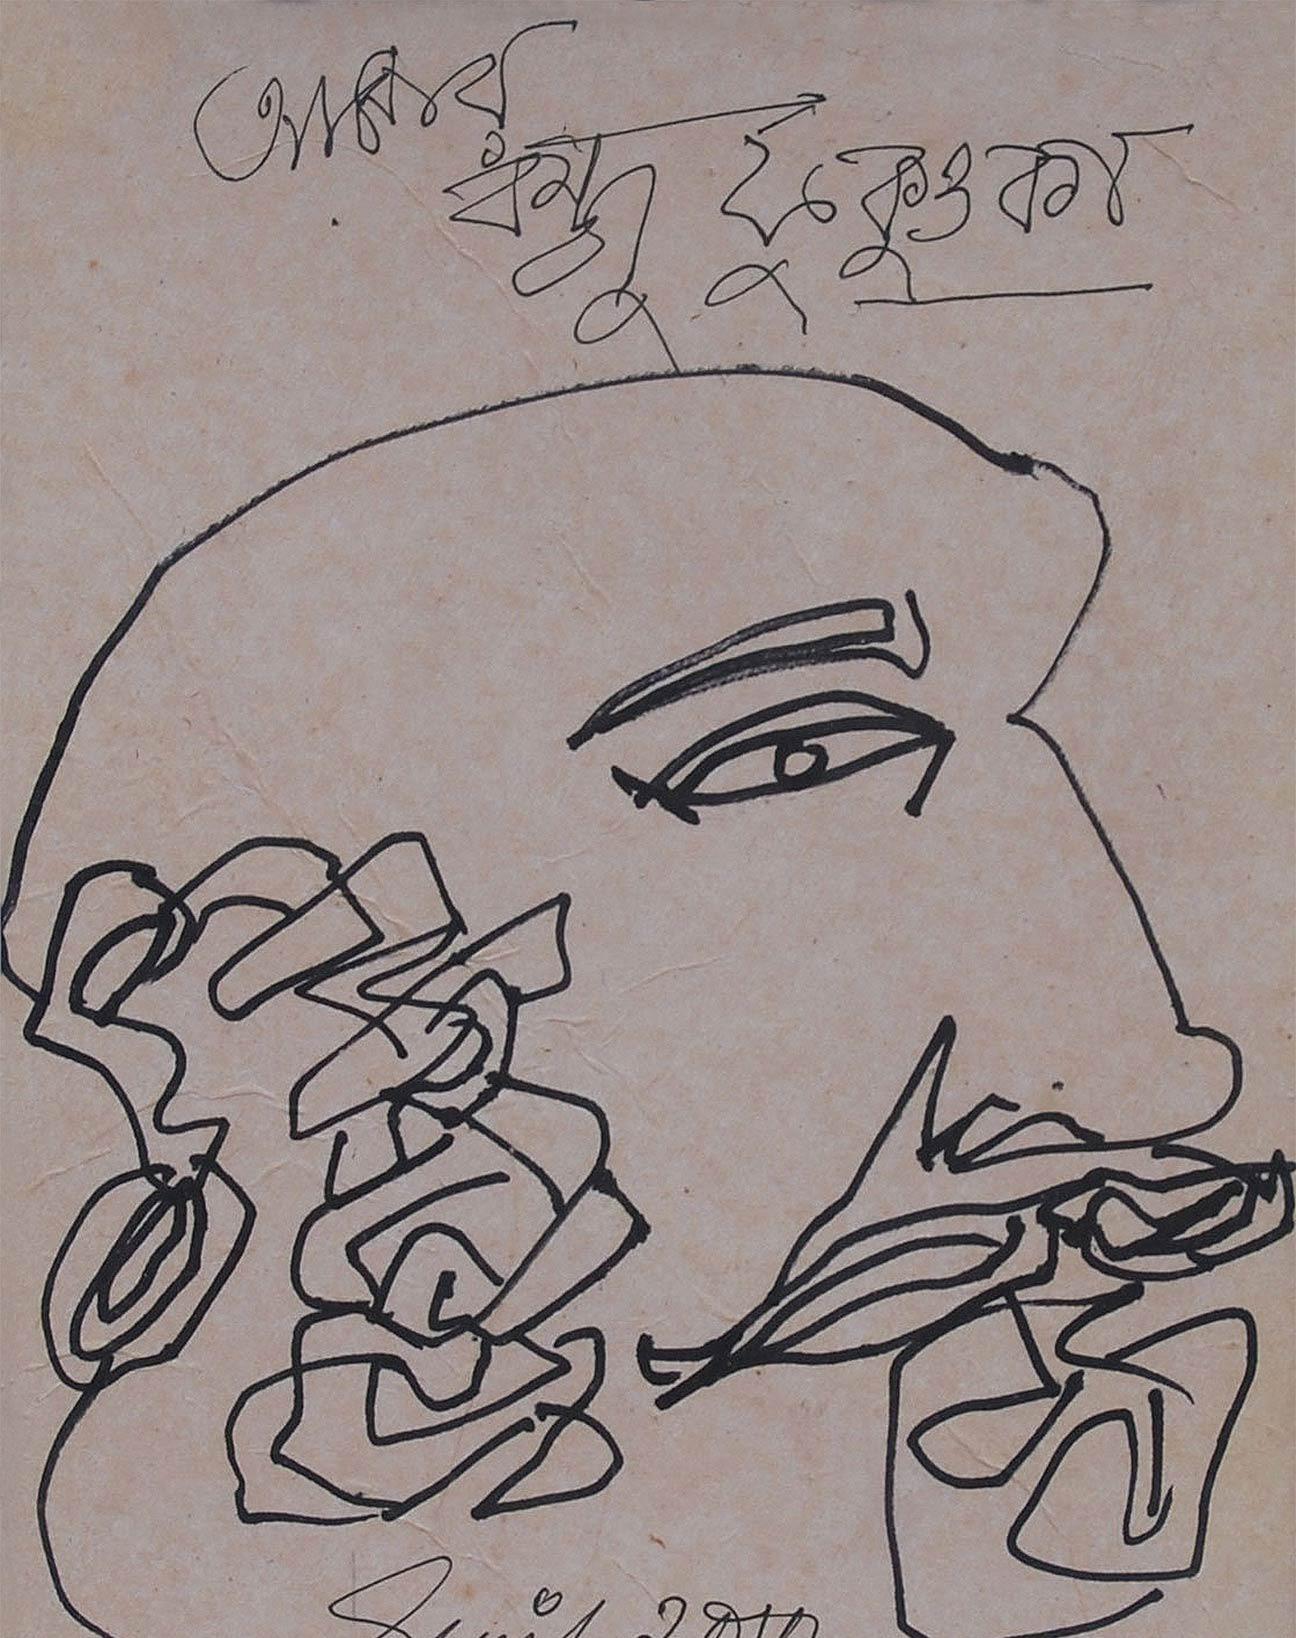 Sunil Das - Head - 9 x 7 inches (unframed size)
Ink on Paper
Inclusive of shipment in ready to hang form.

Sunil Das (1939-2015) was a Master Modern Indian Artist from Bengal. Extremely successful right from his college days, Sunil Das has been